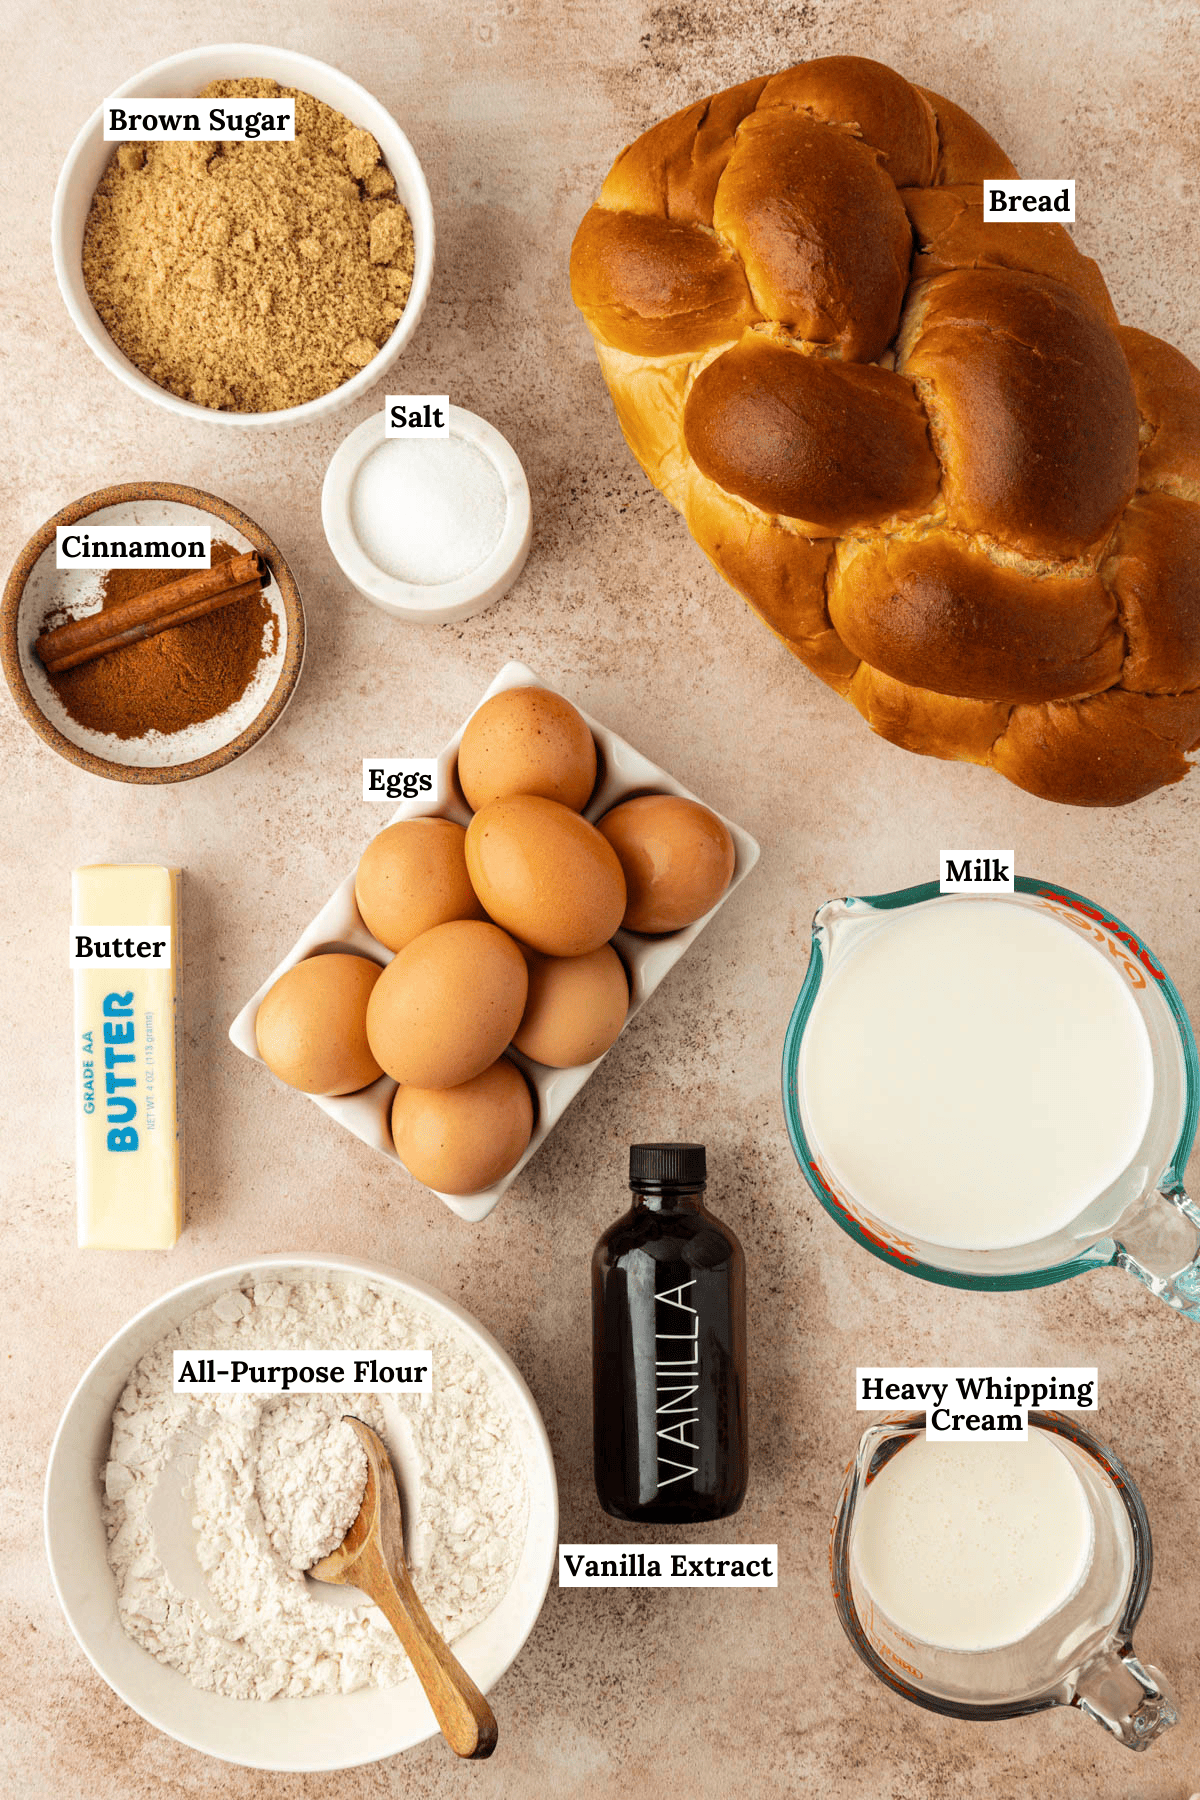 over head view of the ingredients for french toast casserole including a loaf of bread, a bowl of brown sugar, a small bowl of salt, a bowl of cinnamon, eight brown eggs, a stick of butter, a measuring cup of milk, a measuring cup of heavy whipping cream, a bottle of vanilla extract and a bowl of all-purpose flour